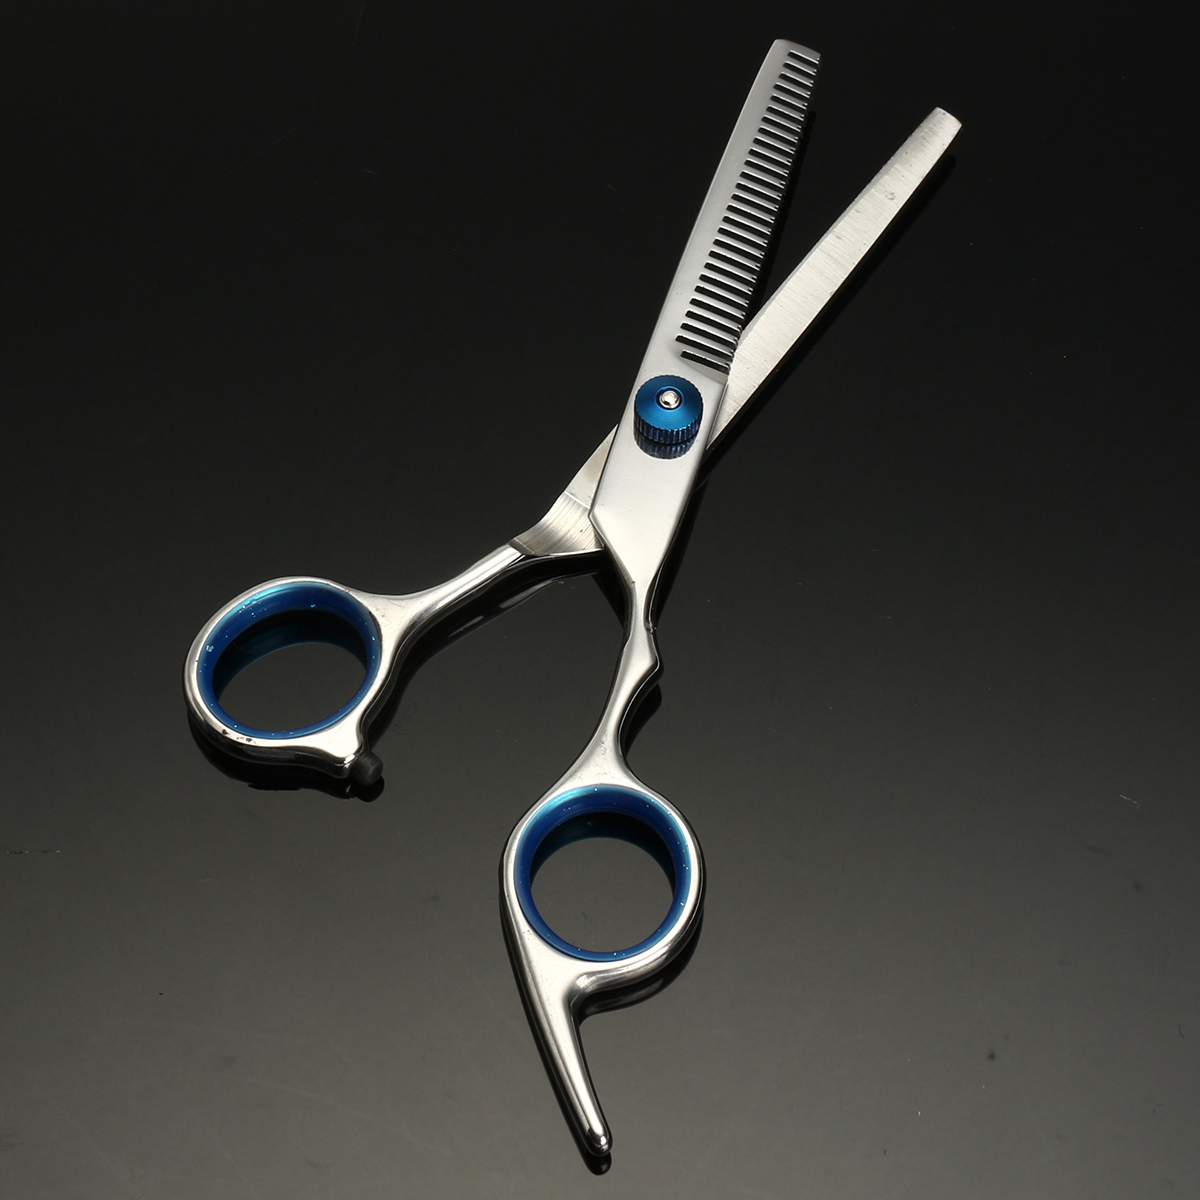 68-inch-Salon-Hair-Cutting-Scissors-Kit-Comb-Clips-Barber-Shears-Hairdressing-Hair-Styling-Tools-1259769